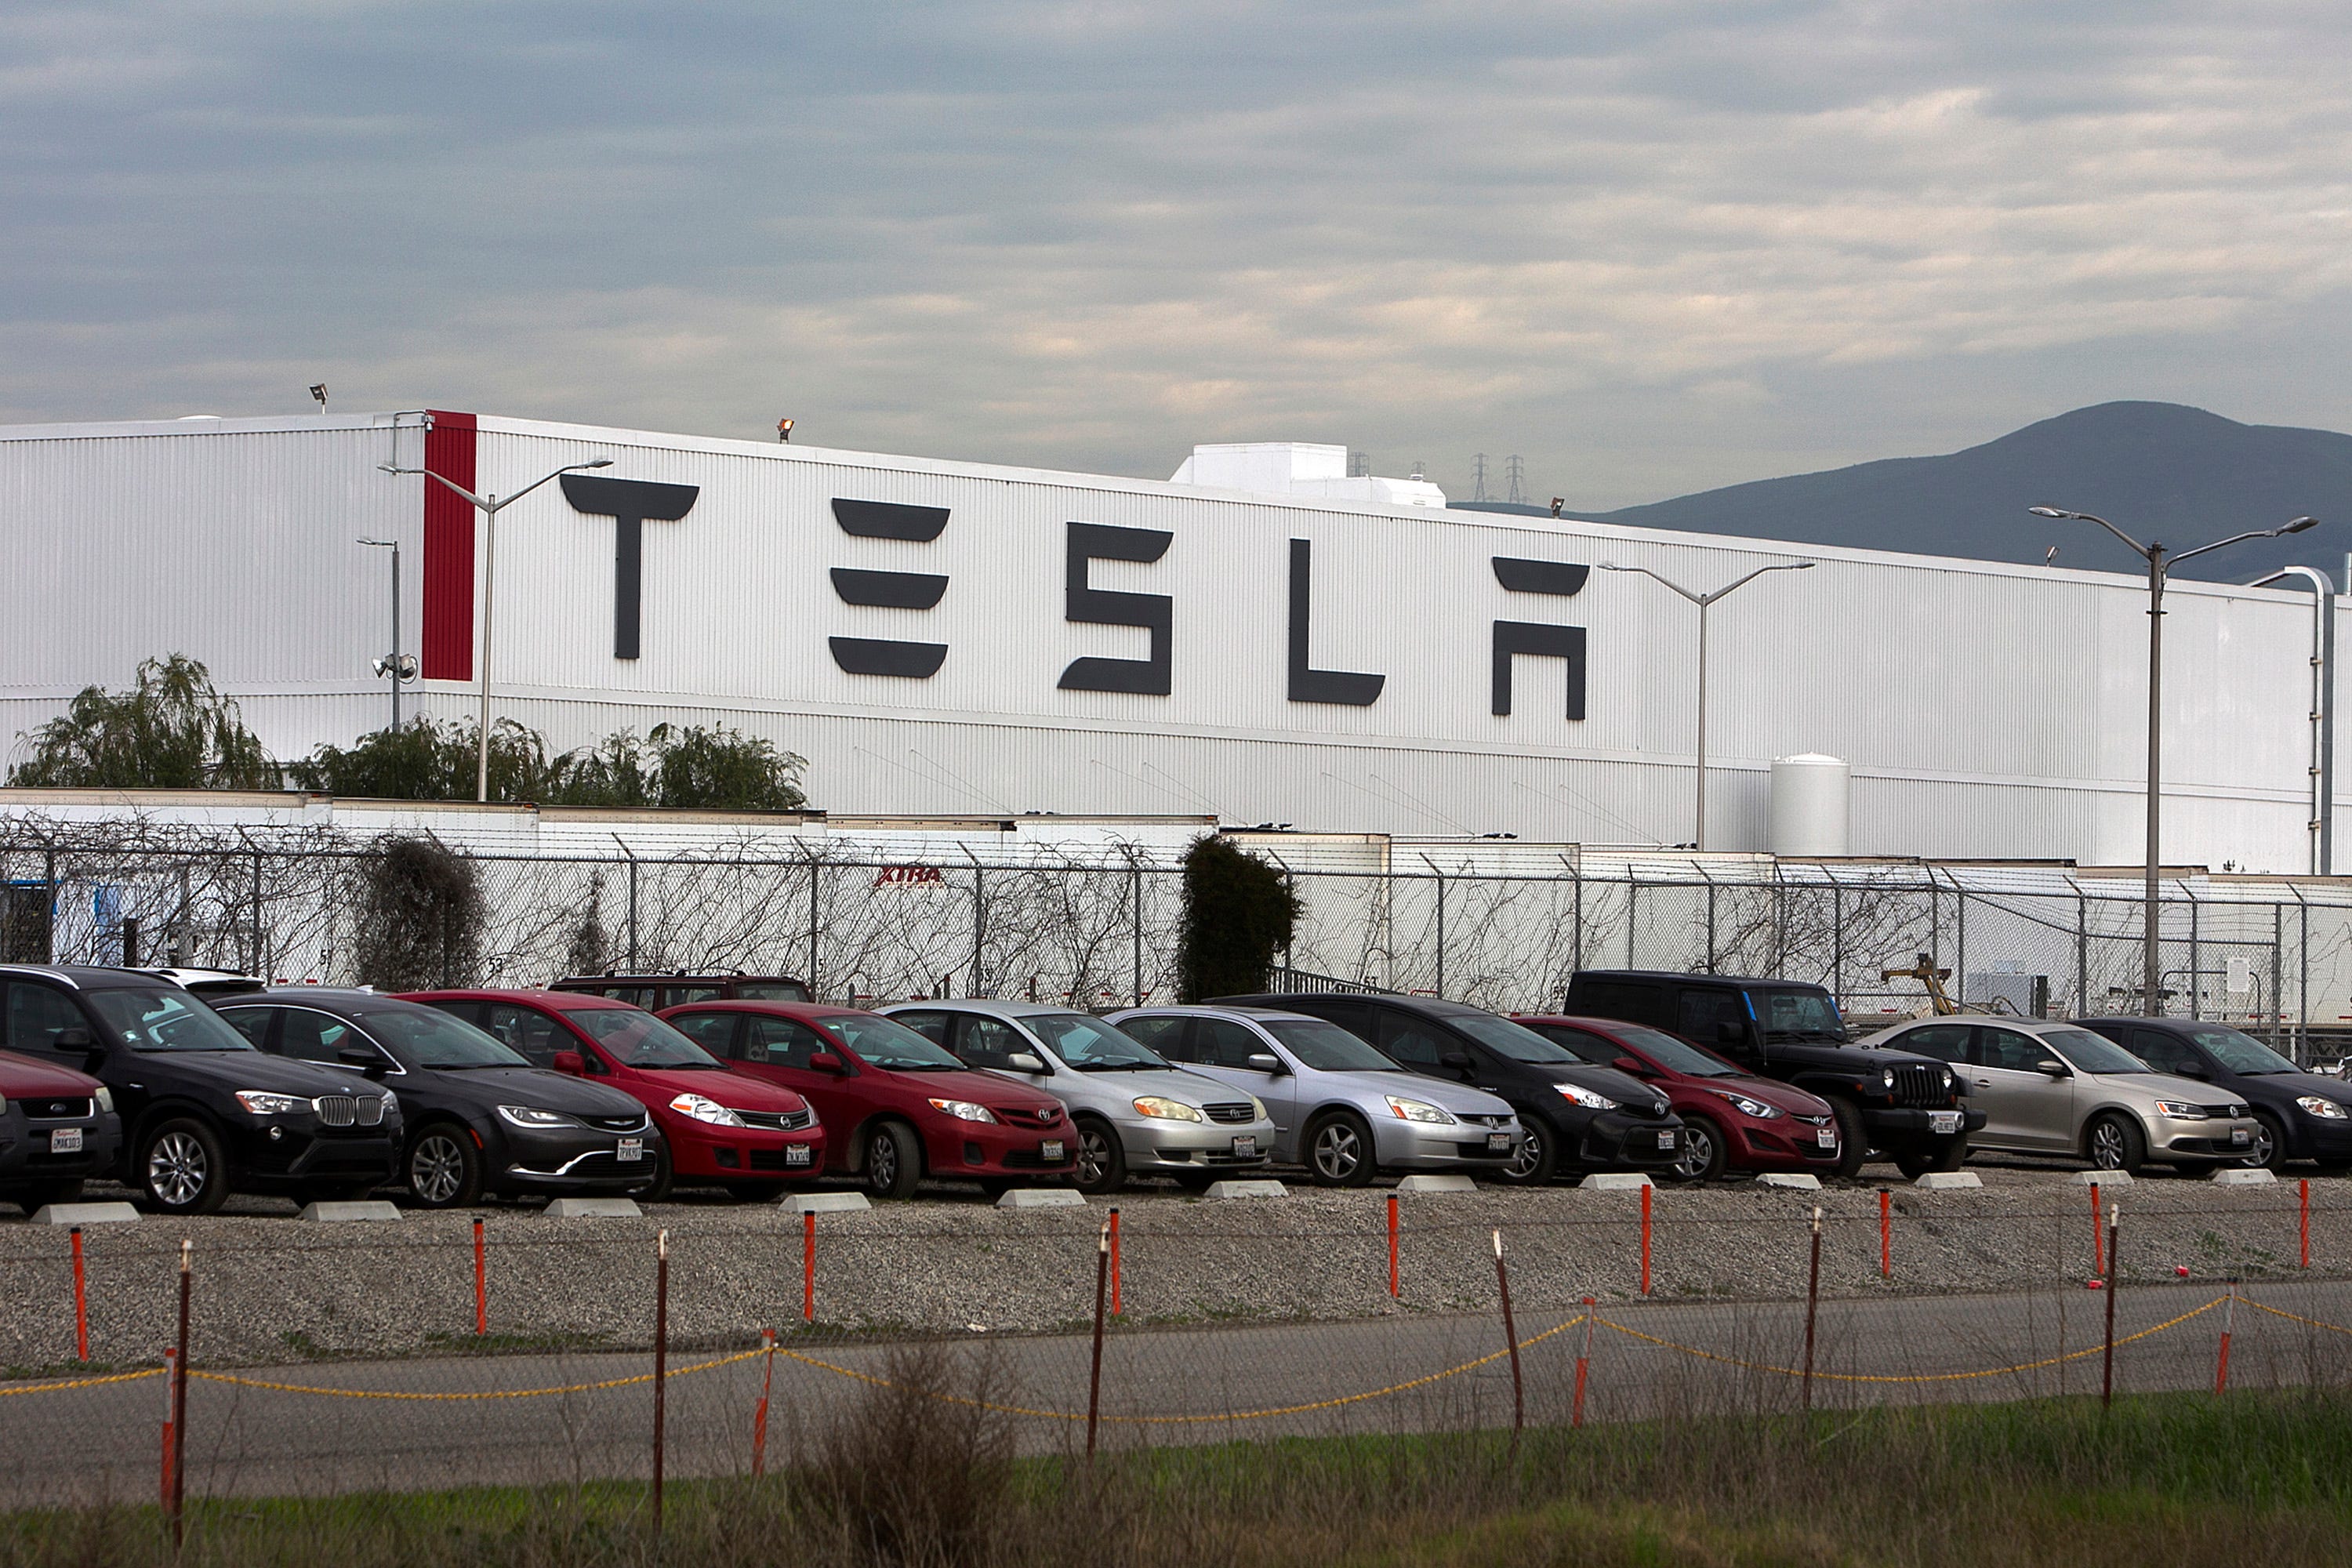 Tesla says Randeep Hothi, who lives near the company’s Fremont, Calif., assembly plant, struck a security employee with his car and later endangered workers testing a Model 3. Hothi says Tesla is lying.